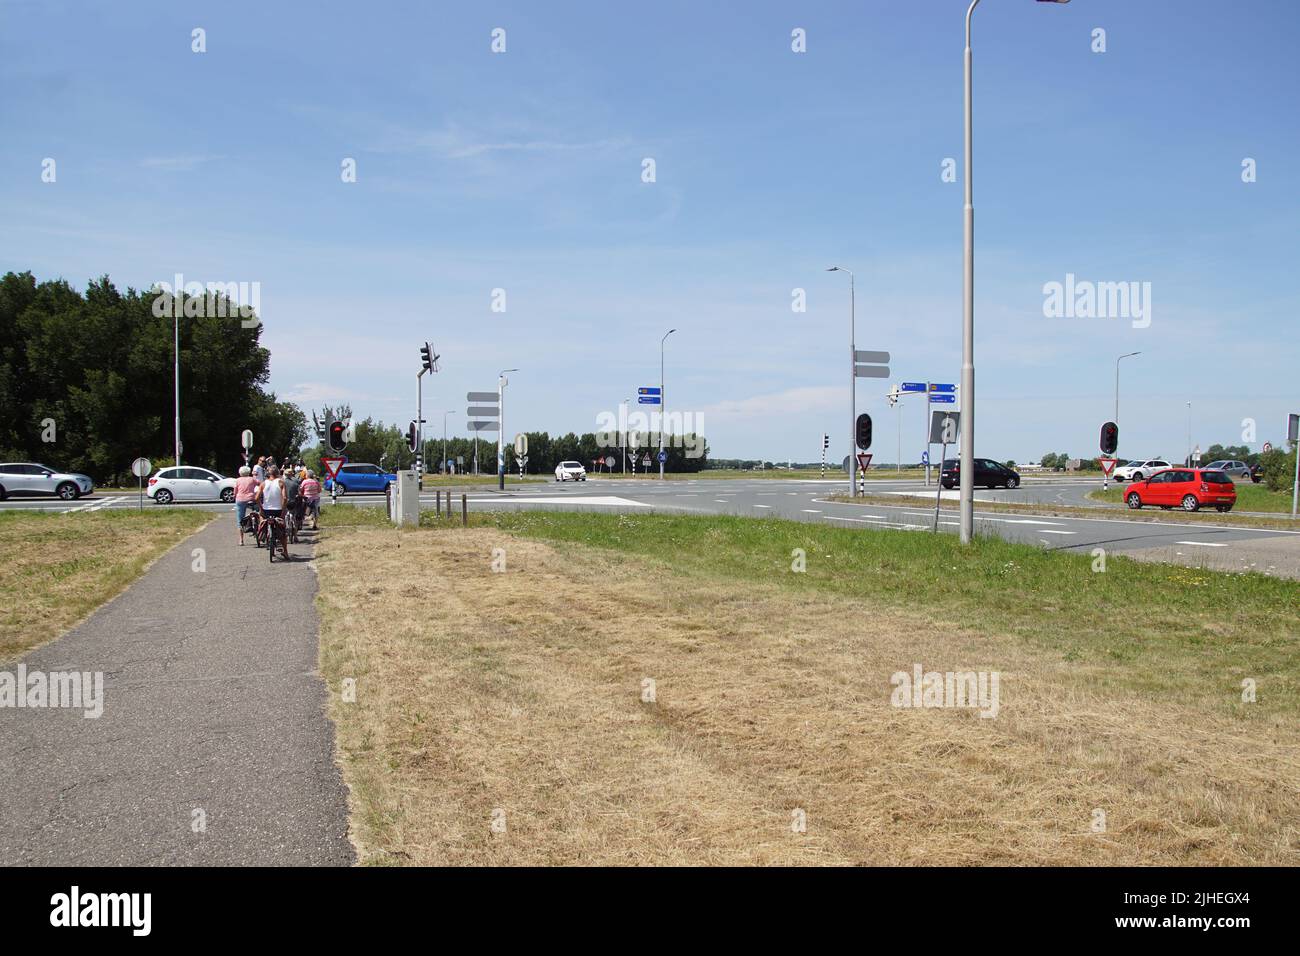 Crossroads from the Dutch city of Alkmaar to Bergen. Cars, cyclists, pasture. Dry grass in the verge. Sunny. summer, Netherlands Stock Photo